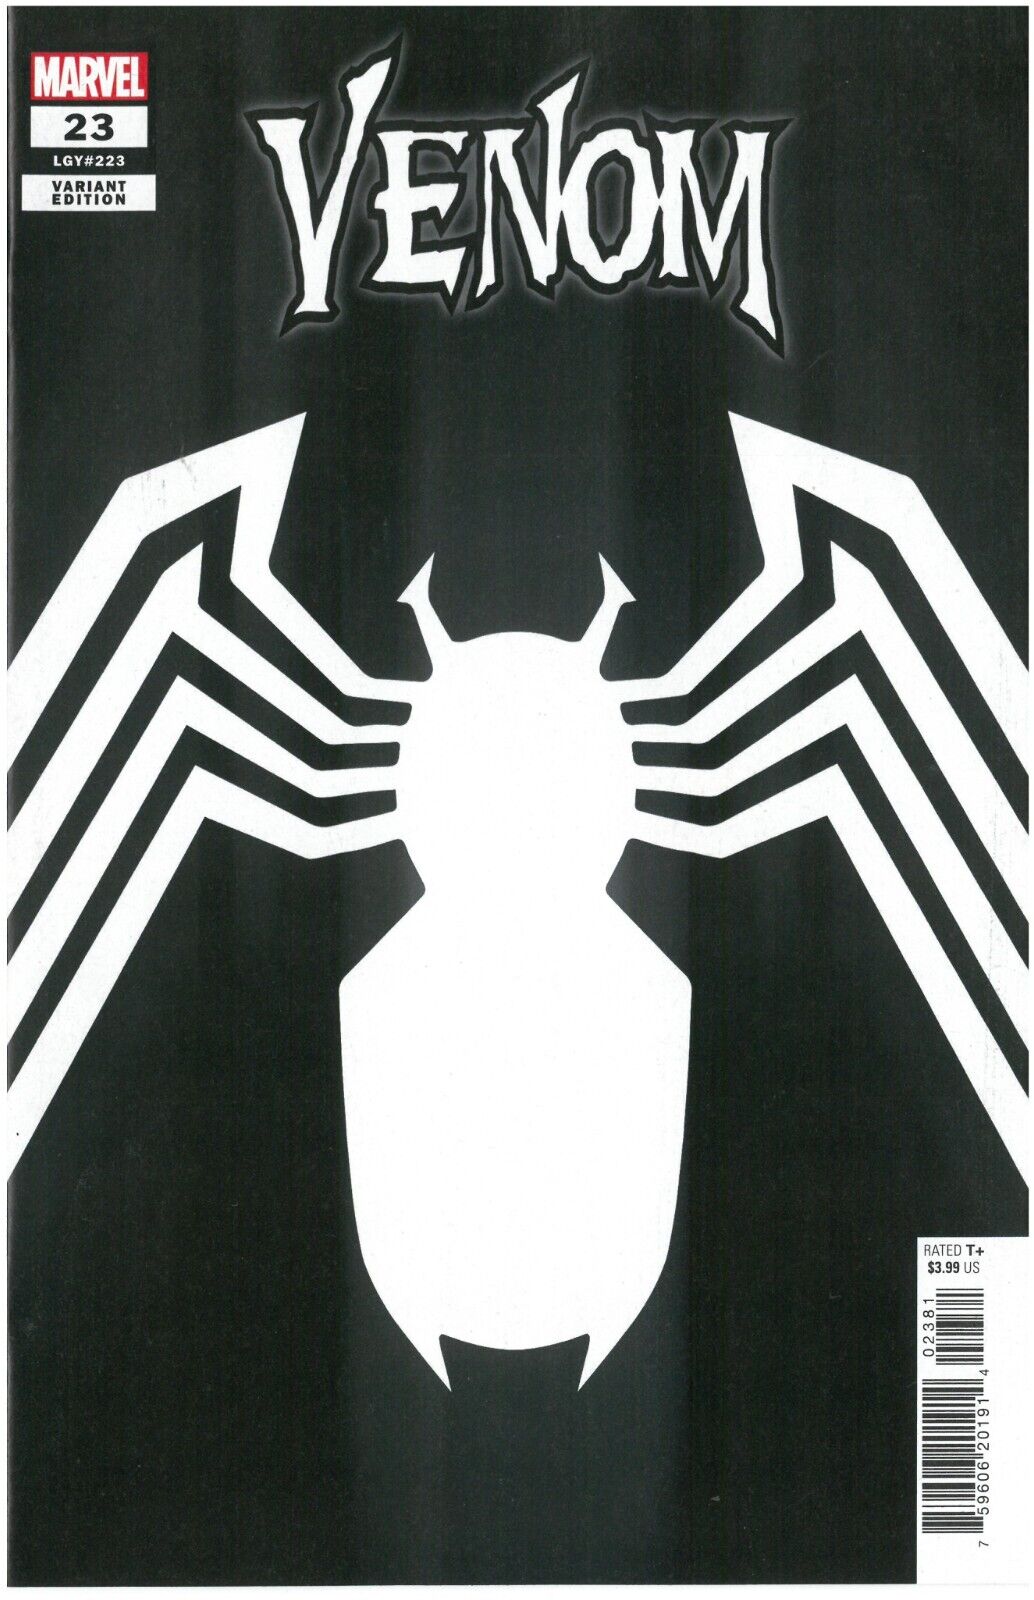 VENOM #23 (INSIGNIA VARIANT)(1ST APPEARANCE OF A NEW SYMBIOTE) ~ Marvel